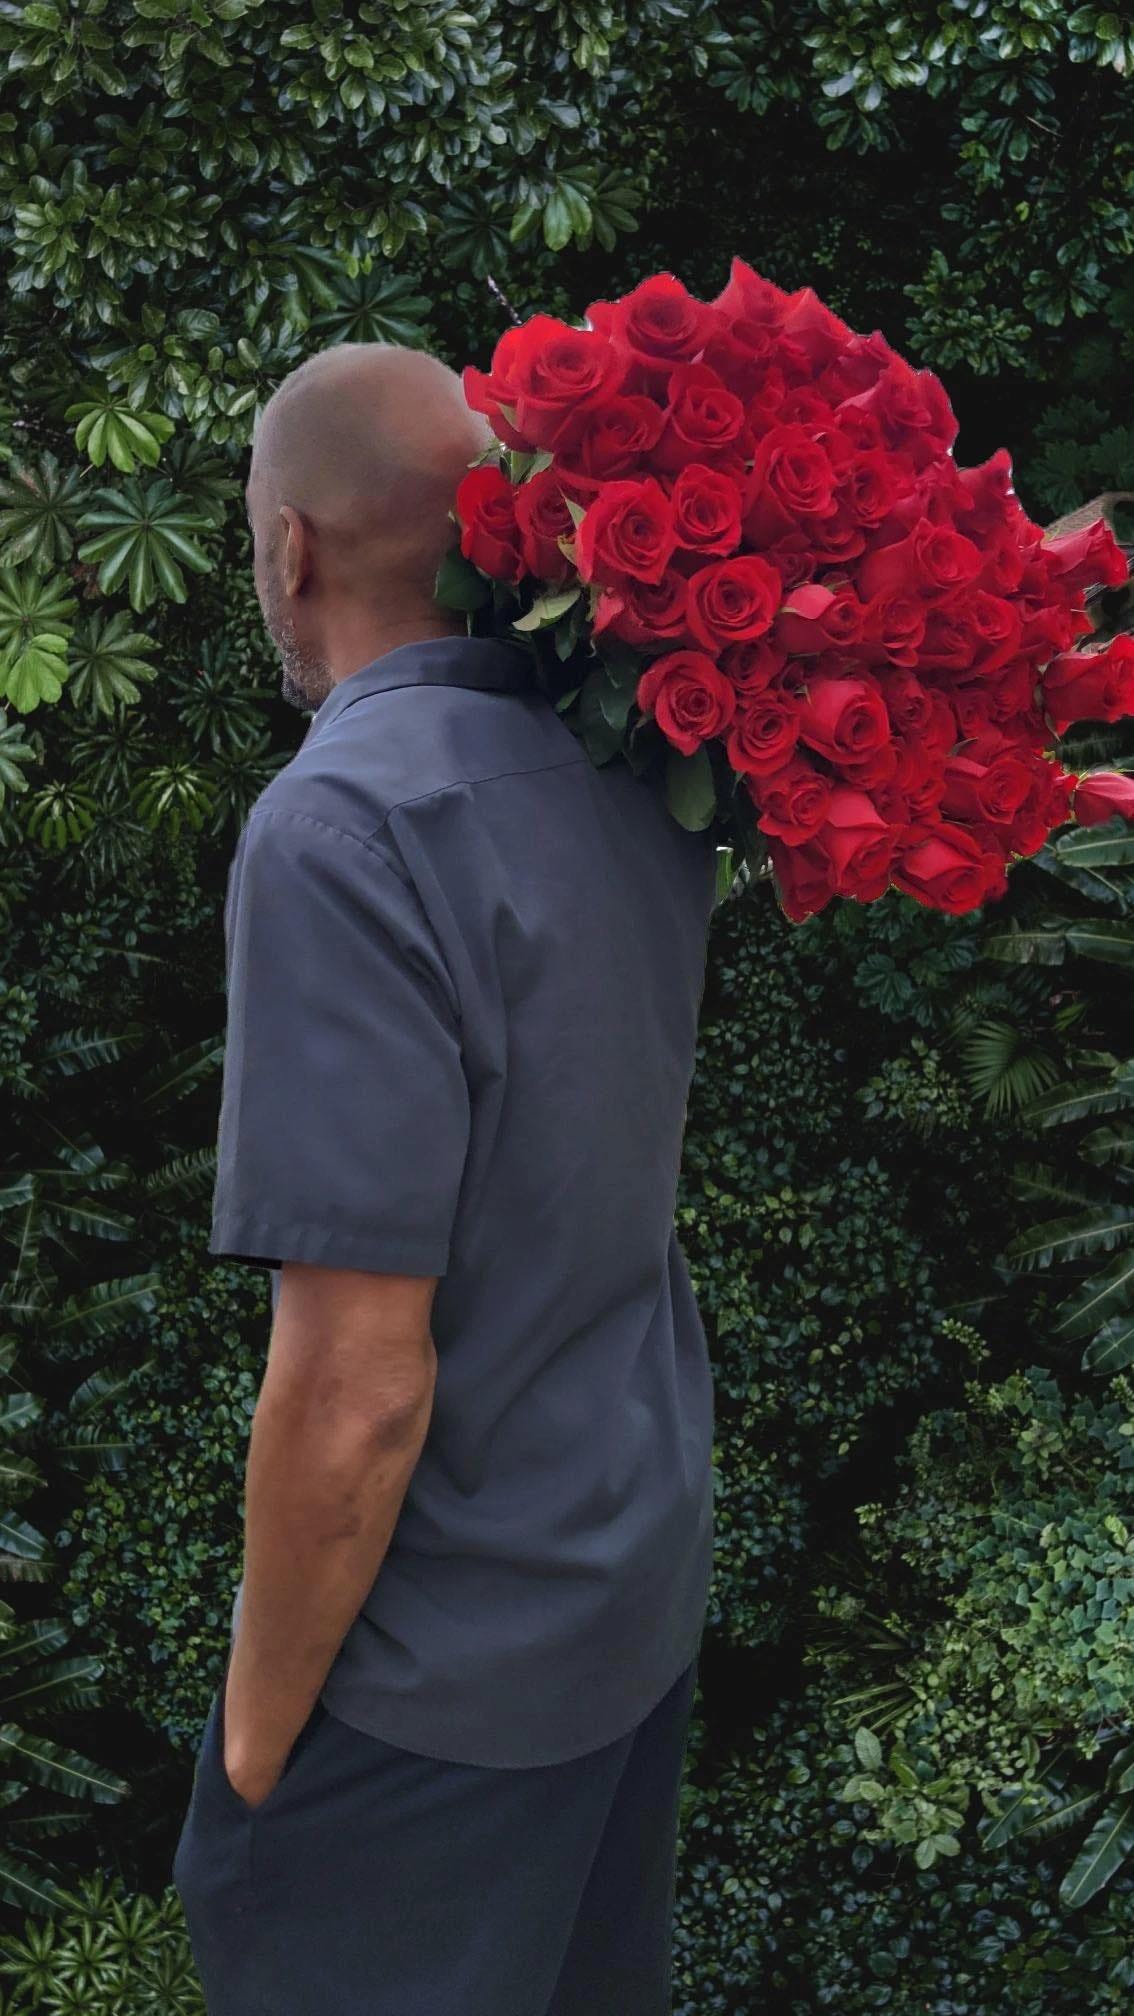 Standing at 6 feet, 4 inches tall, native Detroiter Claude Thompson knows something about walking tall, but the veteran florist says he gets an extra lift when making a delivery. "I get a feeling of satisfaction from each arrangement," Thompson says.